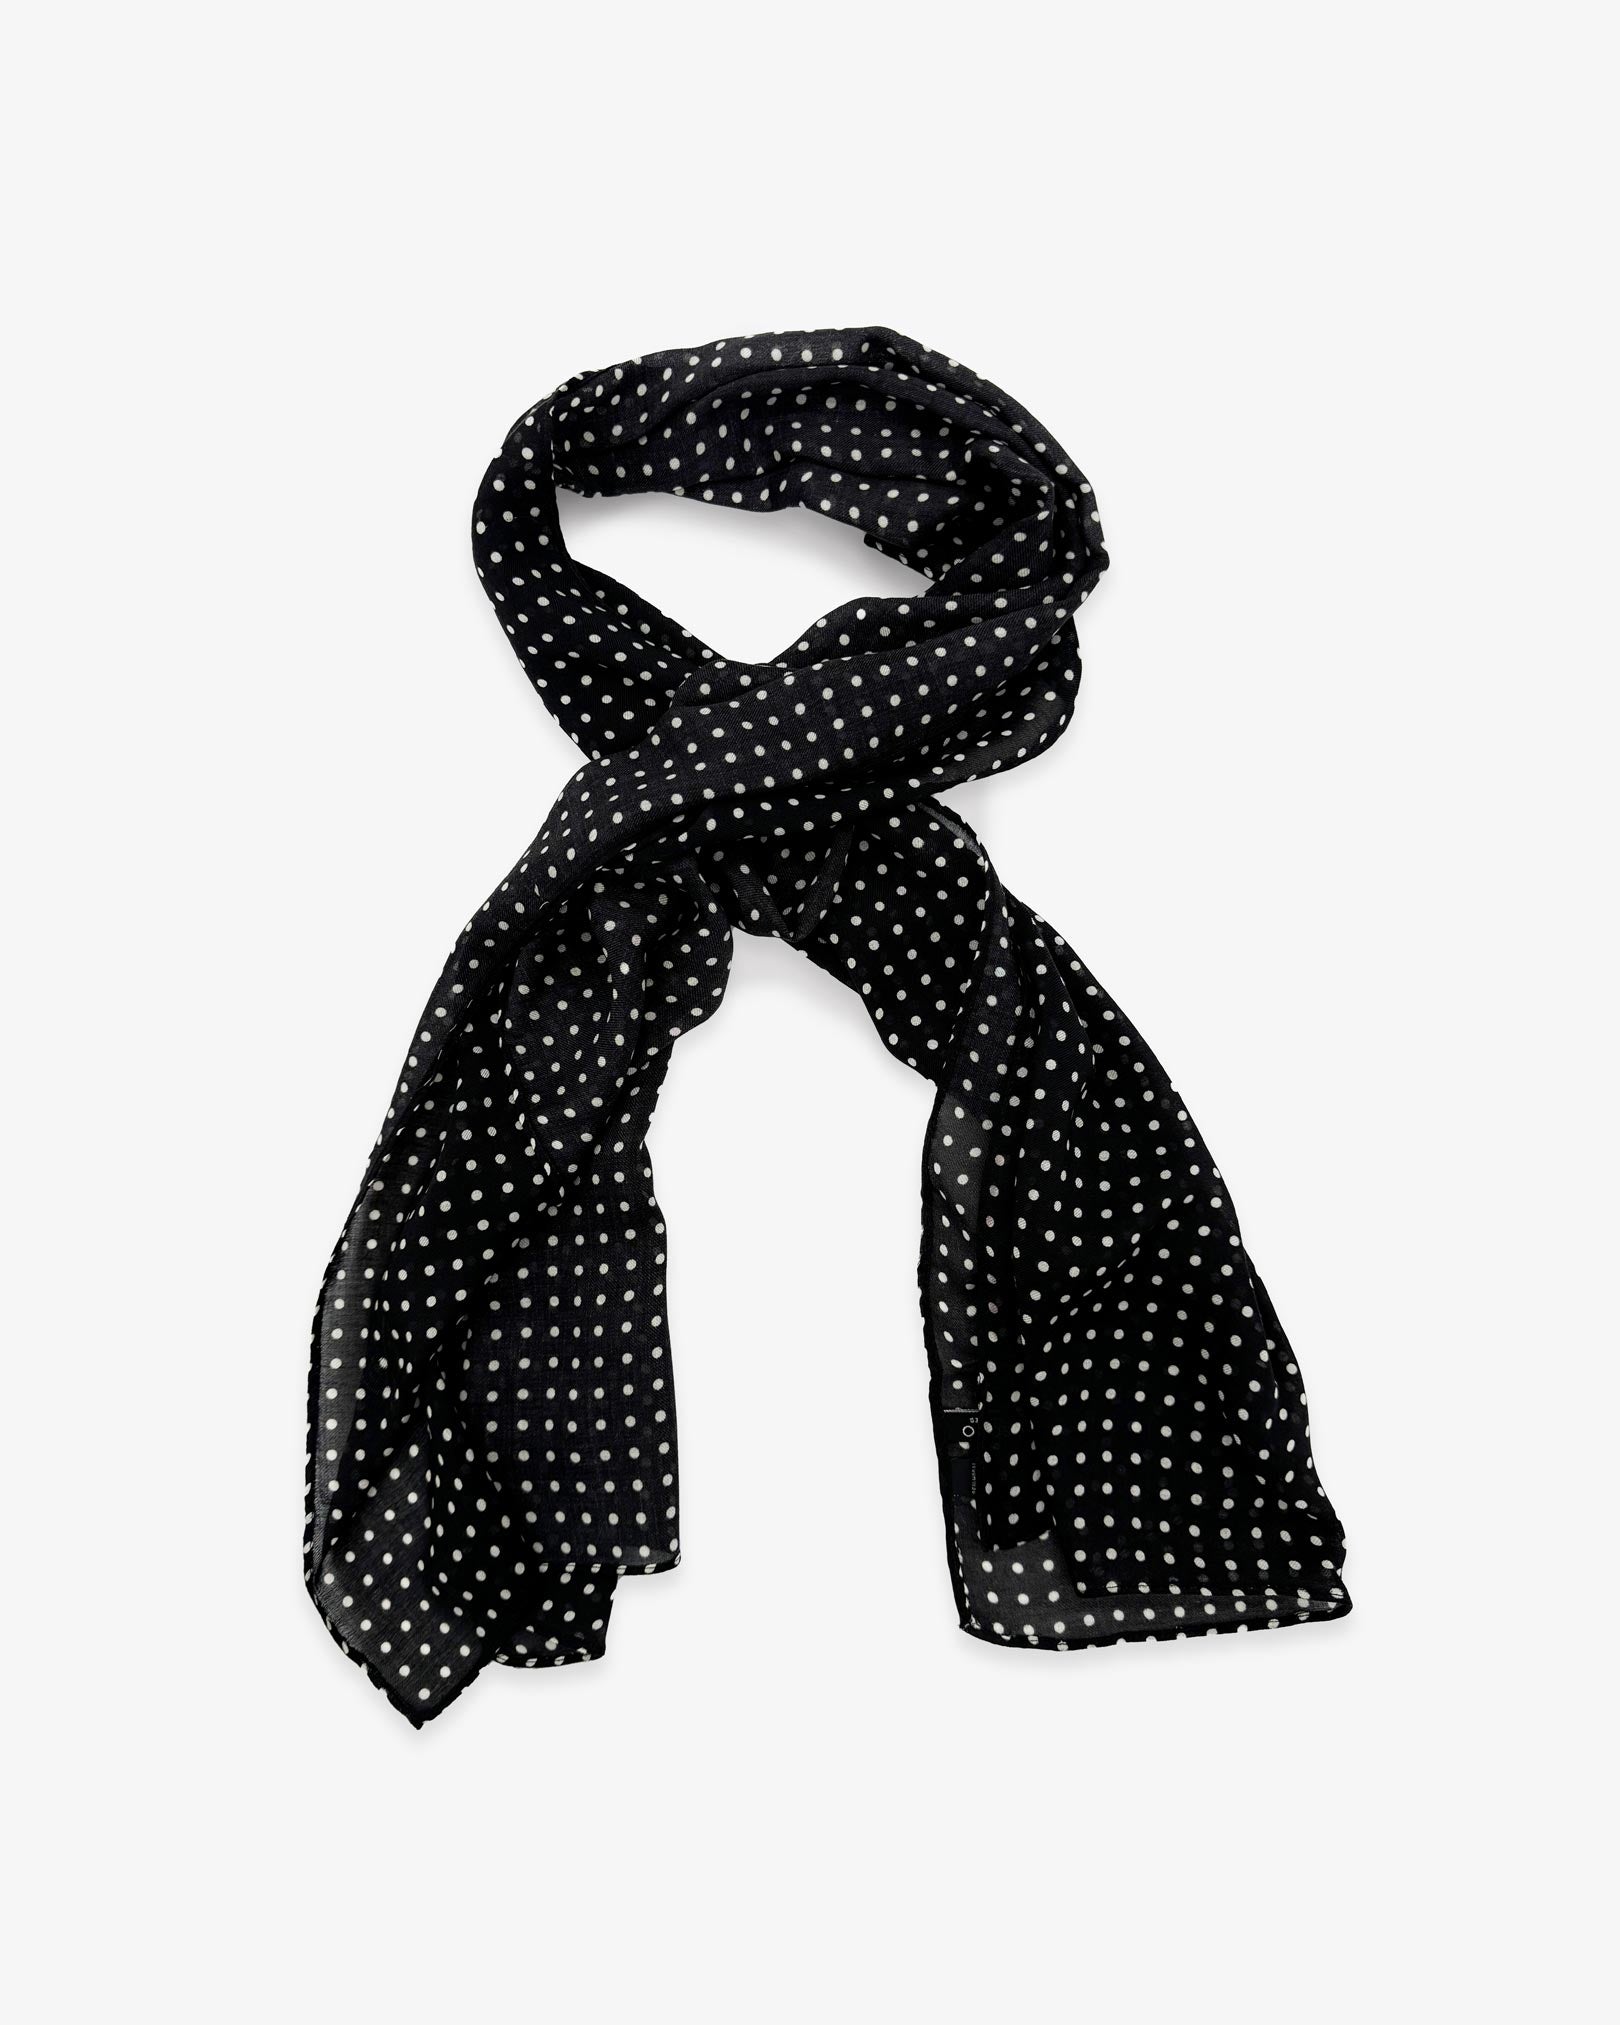 The Shinagwa wide scarf unravelled and looped in the middle, demonstrating the longer scarf length and polka dot patterns.